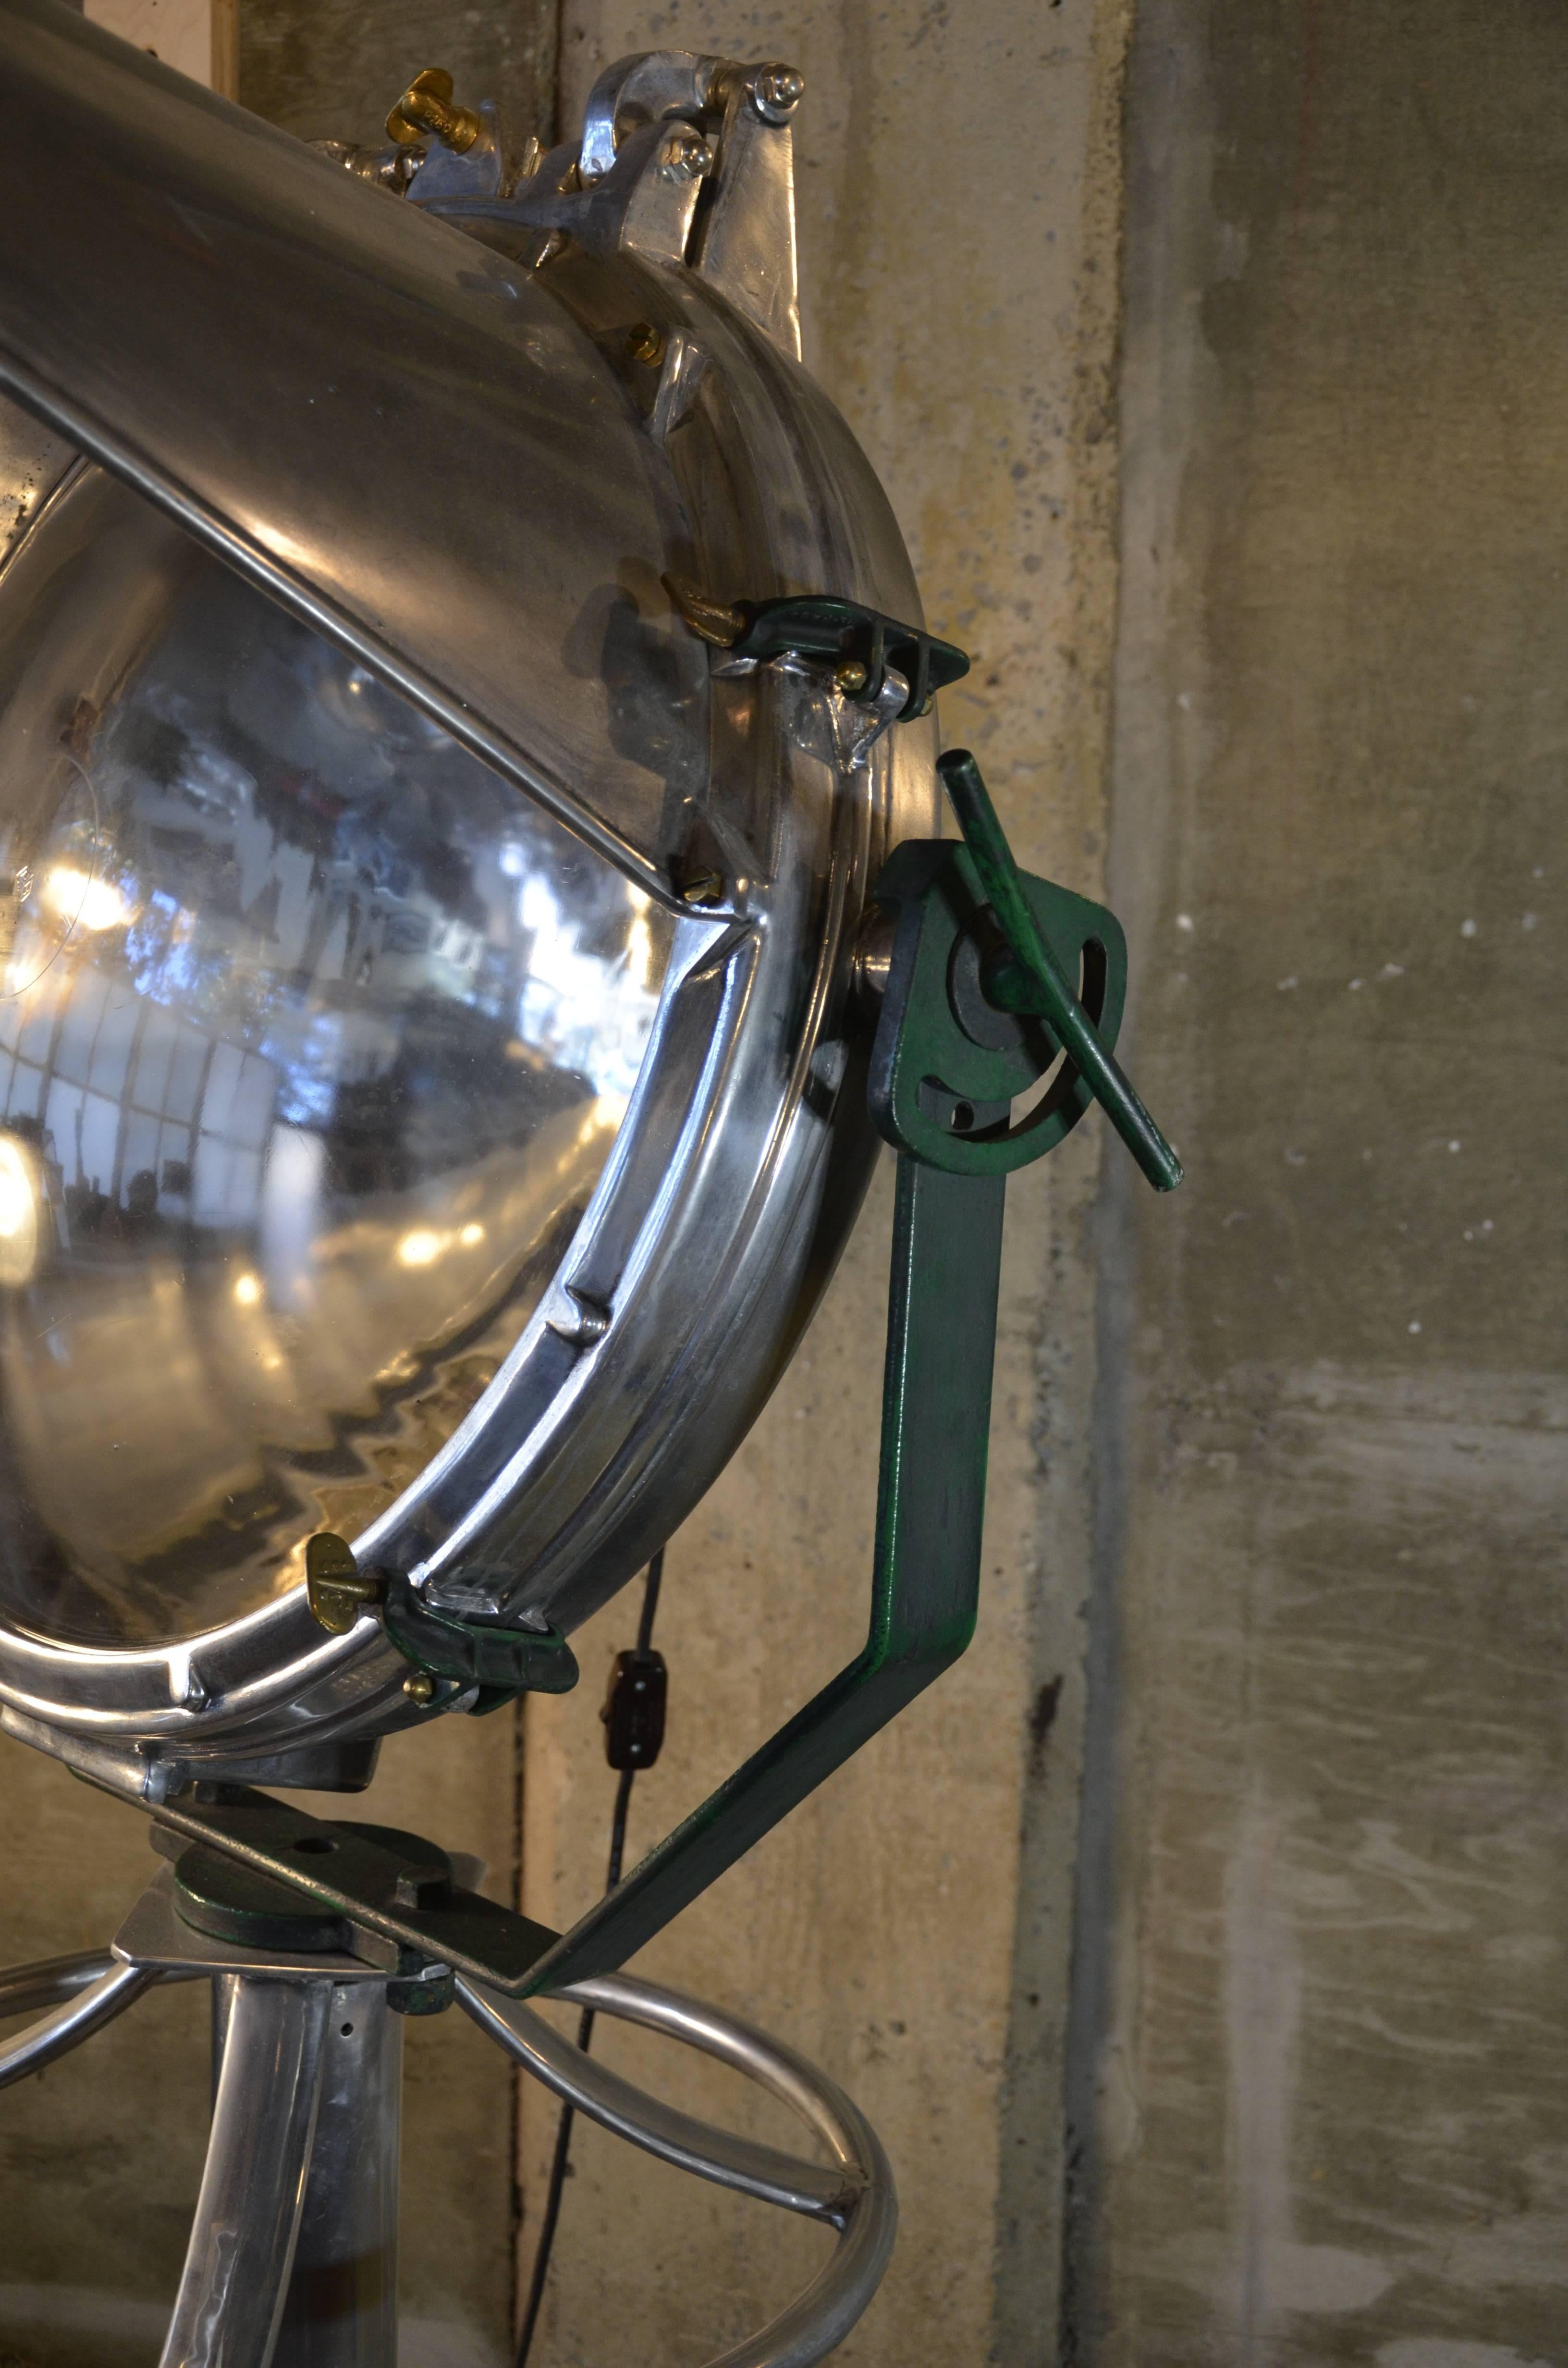 Exceptionally large Industrial spot light made of polished mixed metals, and mounted to a heavy duty carridge for easy transport. Fitted for standard incandescent fixtures.